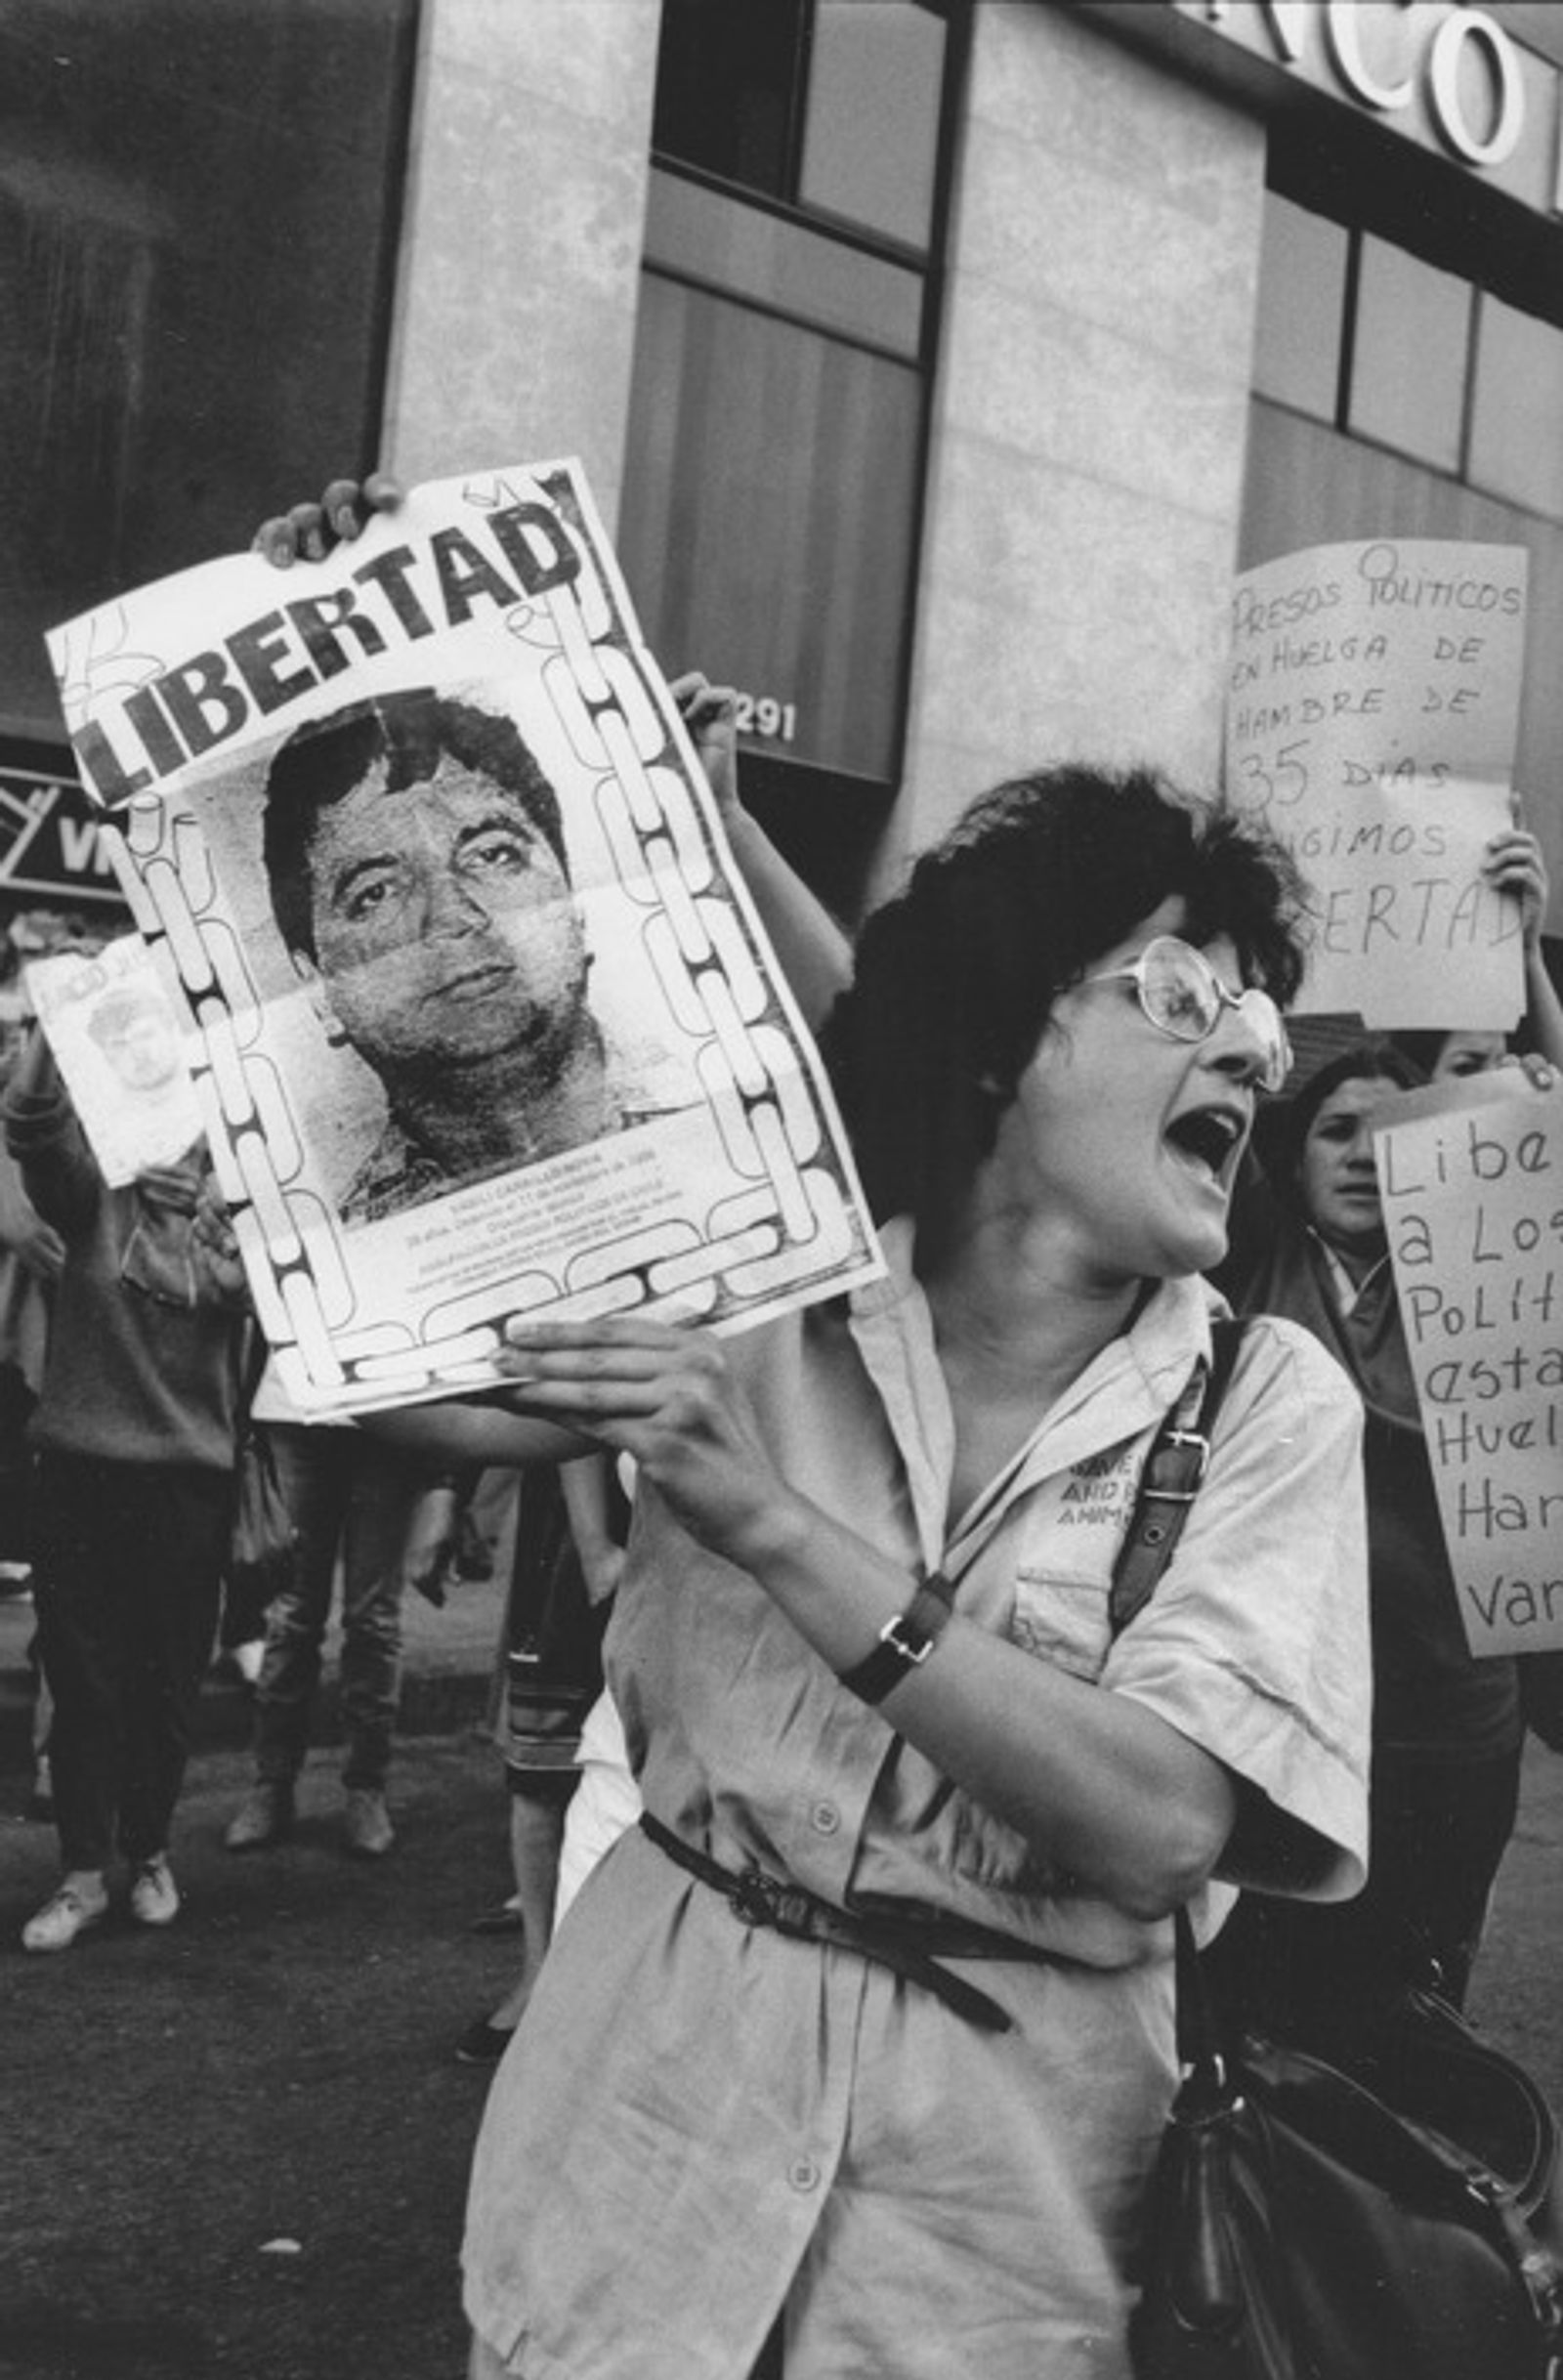 © Julio Etchart - Relatives of disappeared political prisoners demand justice at rallies in 1985. Santiago; Chile